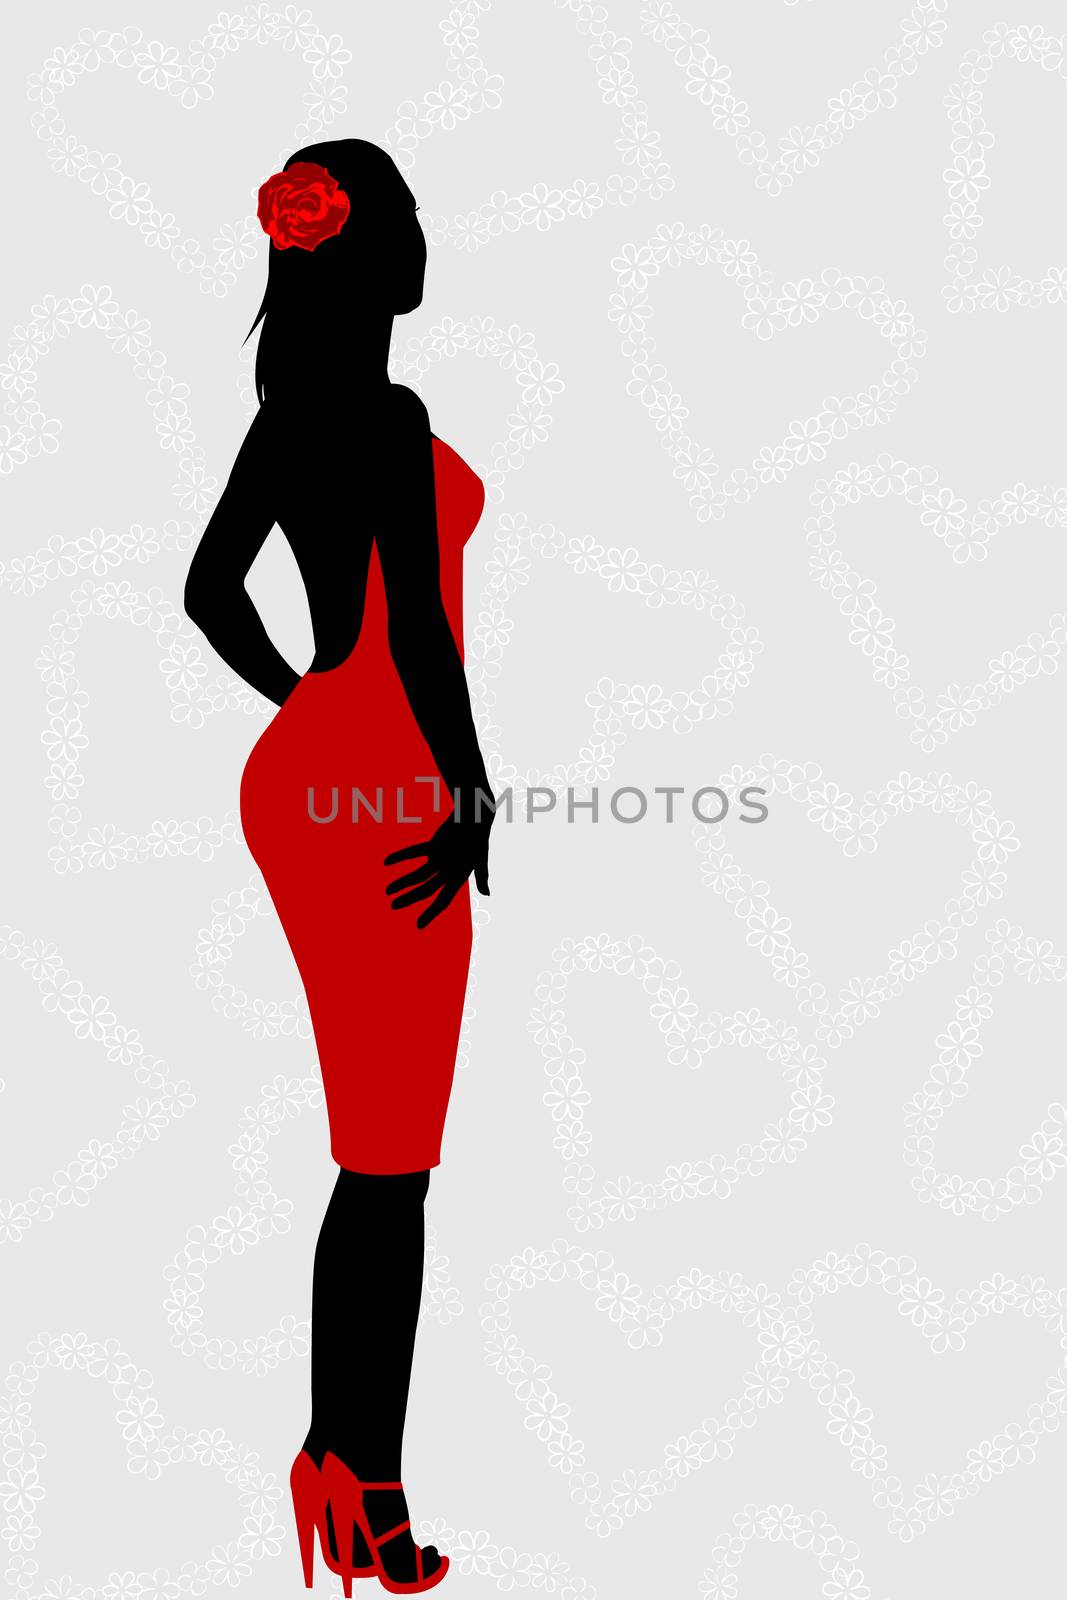 Red dress woman silhouette by hibrida13